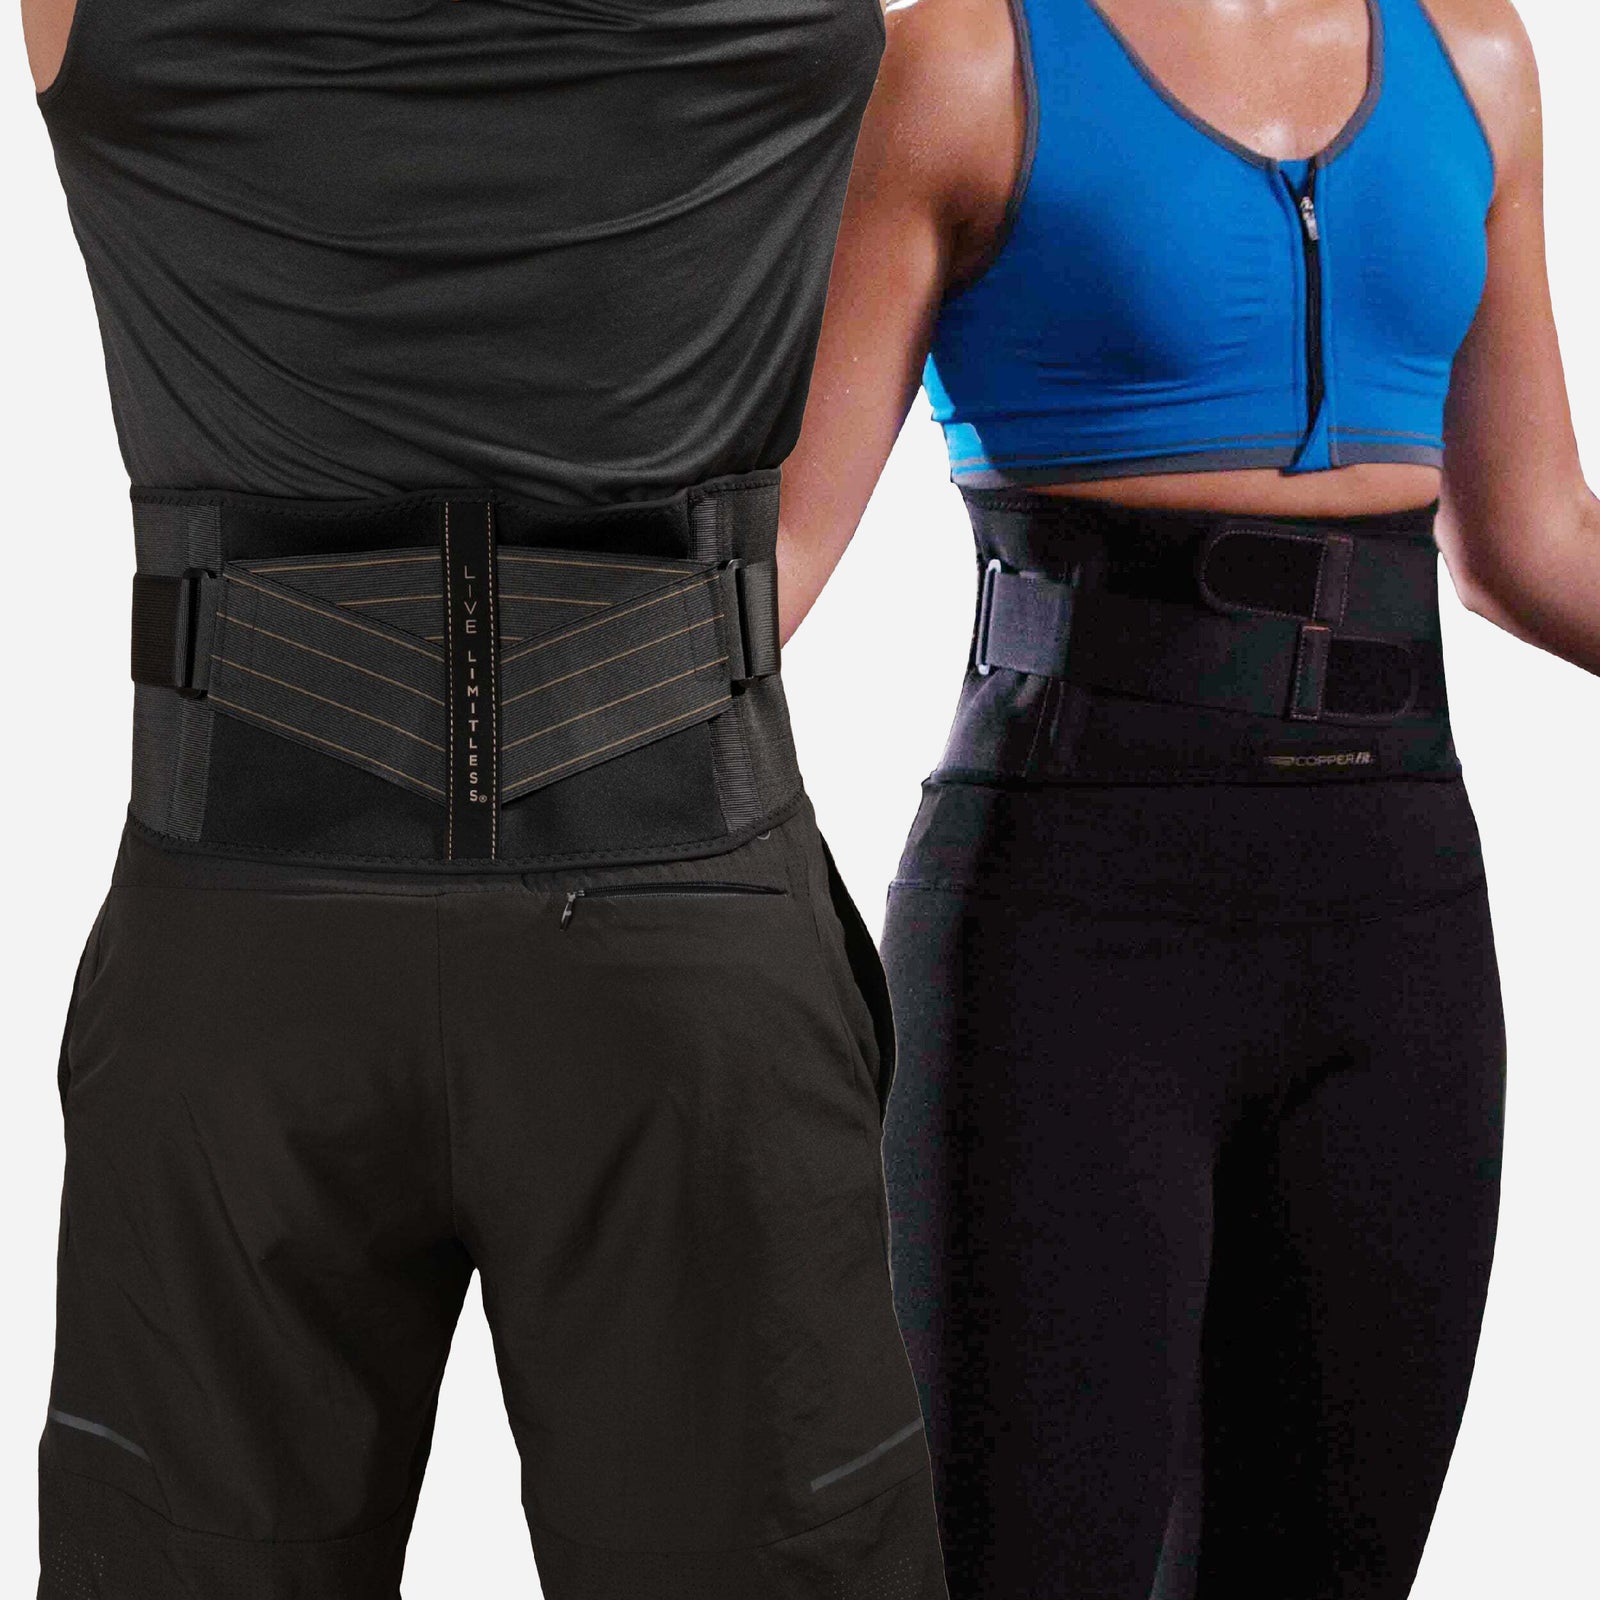  Copper Fit Advanced Back Pro Back Support, Black with Copper  Trim, Small/Medium (CFBACK) : Health & Household